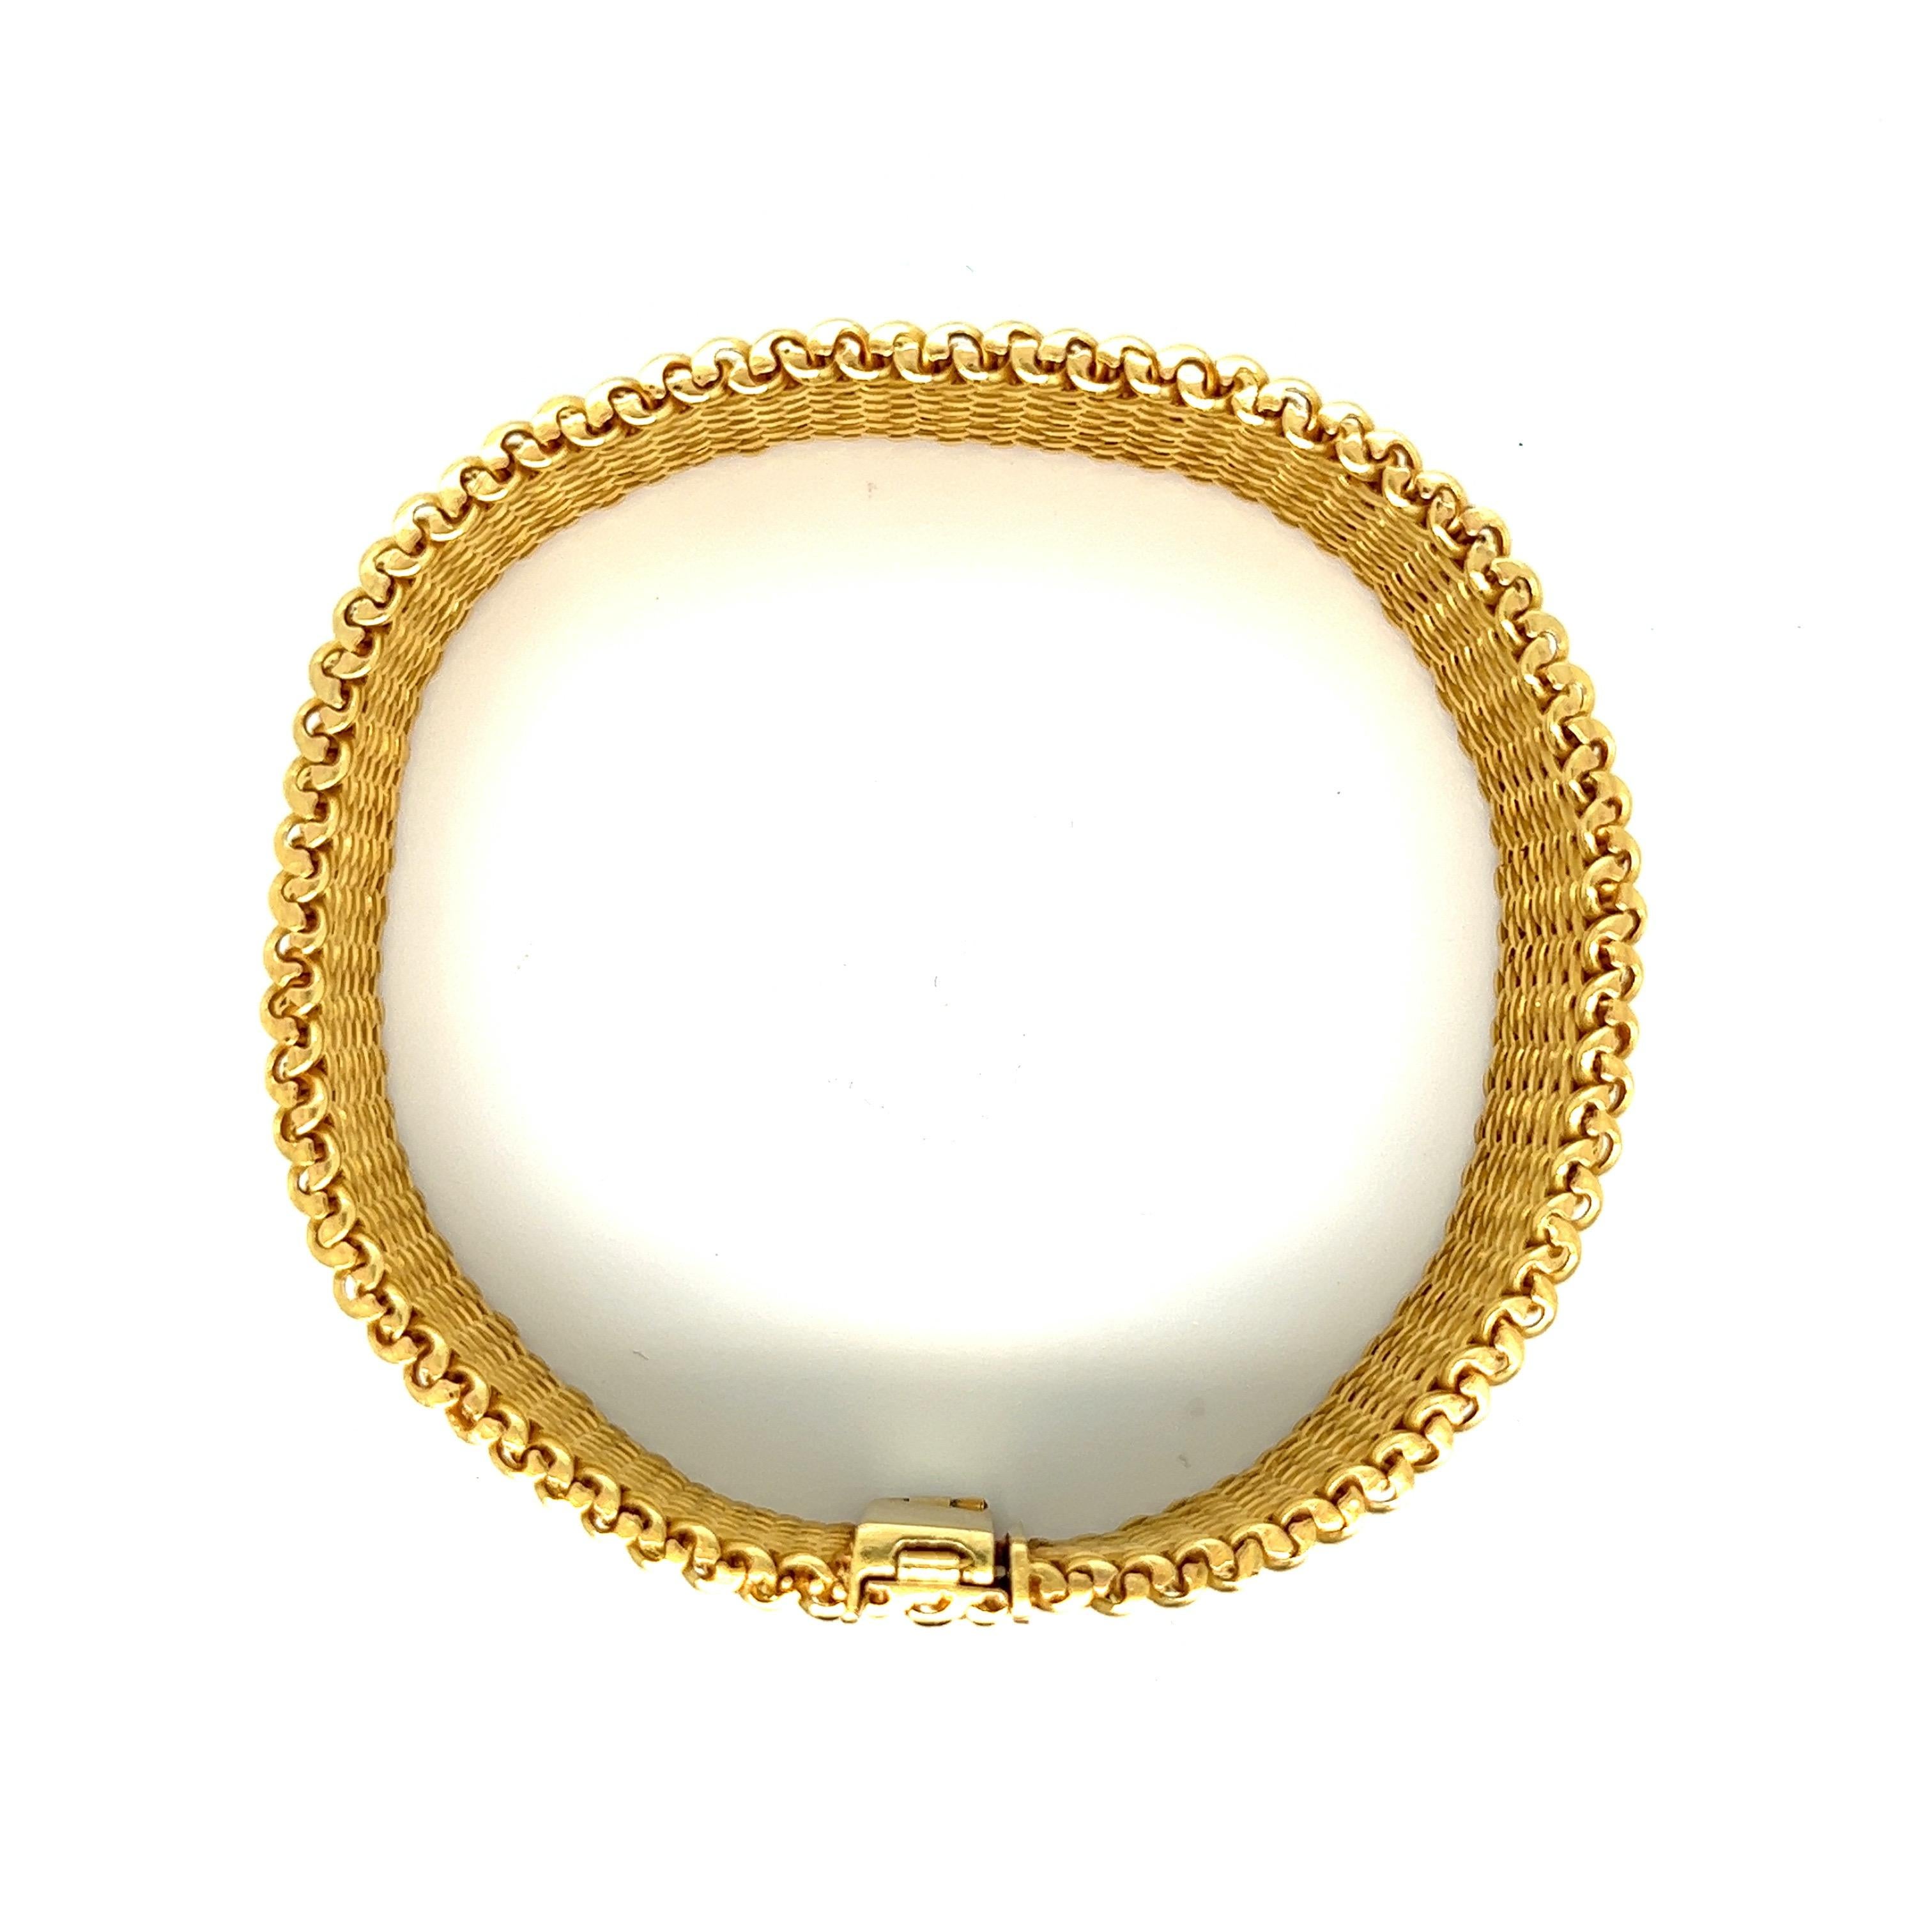 French Gold Strap Bracelet In Excellent Condition For Sale In New York, NY